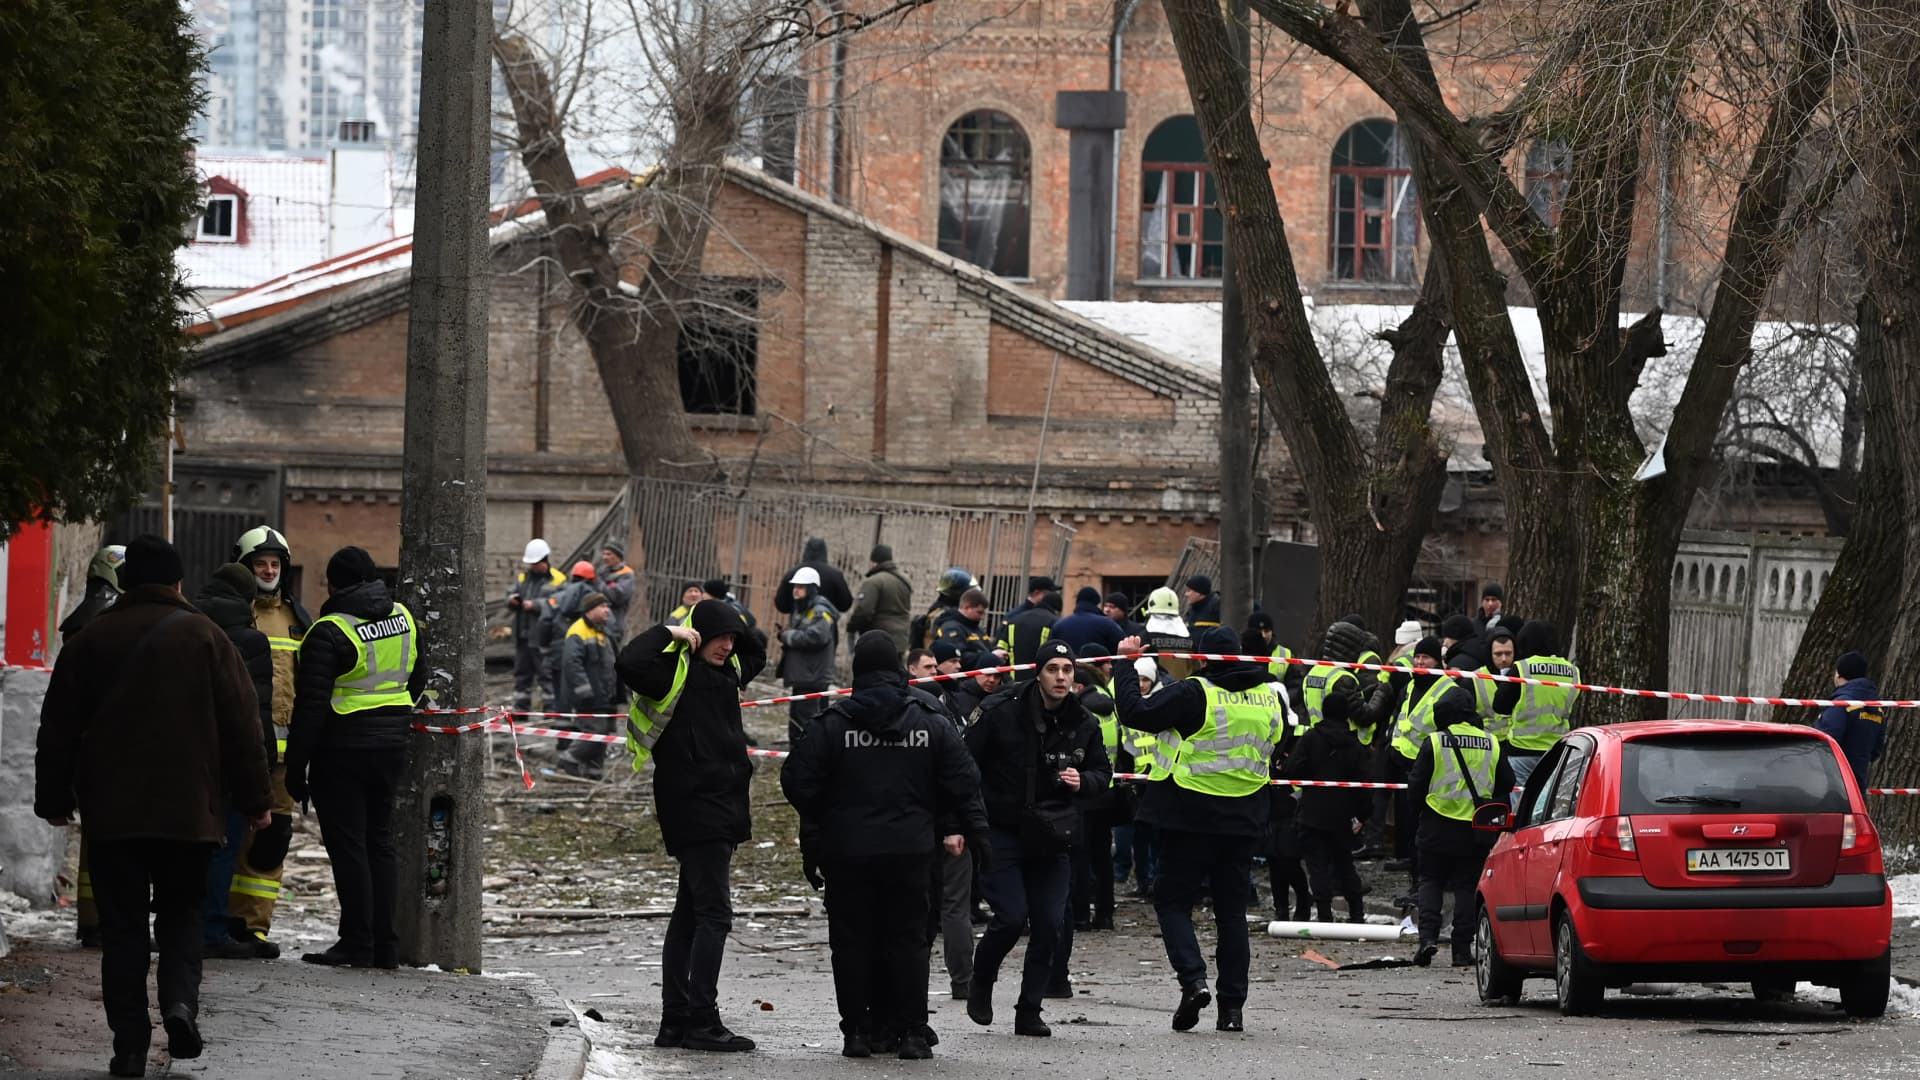 KYIV, UKRAINE - JANUARY 23: Police cordon nearby areas off the damaged buildings after Russian rocket strikes as Russia-Ukraine war continues in Kyiv, Ukraine on January 23, 2024. Russian missile attack targeted the Ukrainian cities of Kyiv, Kharkiv, Pavlohrad, and Balakliia on Tuesday, Jan. 23, killing at least 4 people, wounding several others, and damaging residential buildings. According to an official, nine people were injured in the capital of Kyiv, while 3 people died and 28 people were injured in the attack in Kharkiv. (Photo by Vladimir Shtanko/Anadolu via Getty Images)